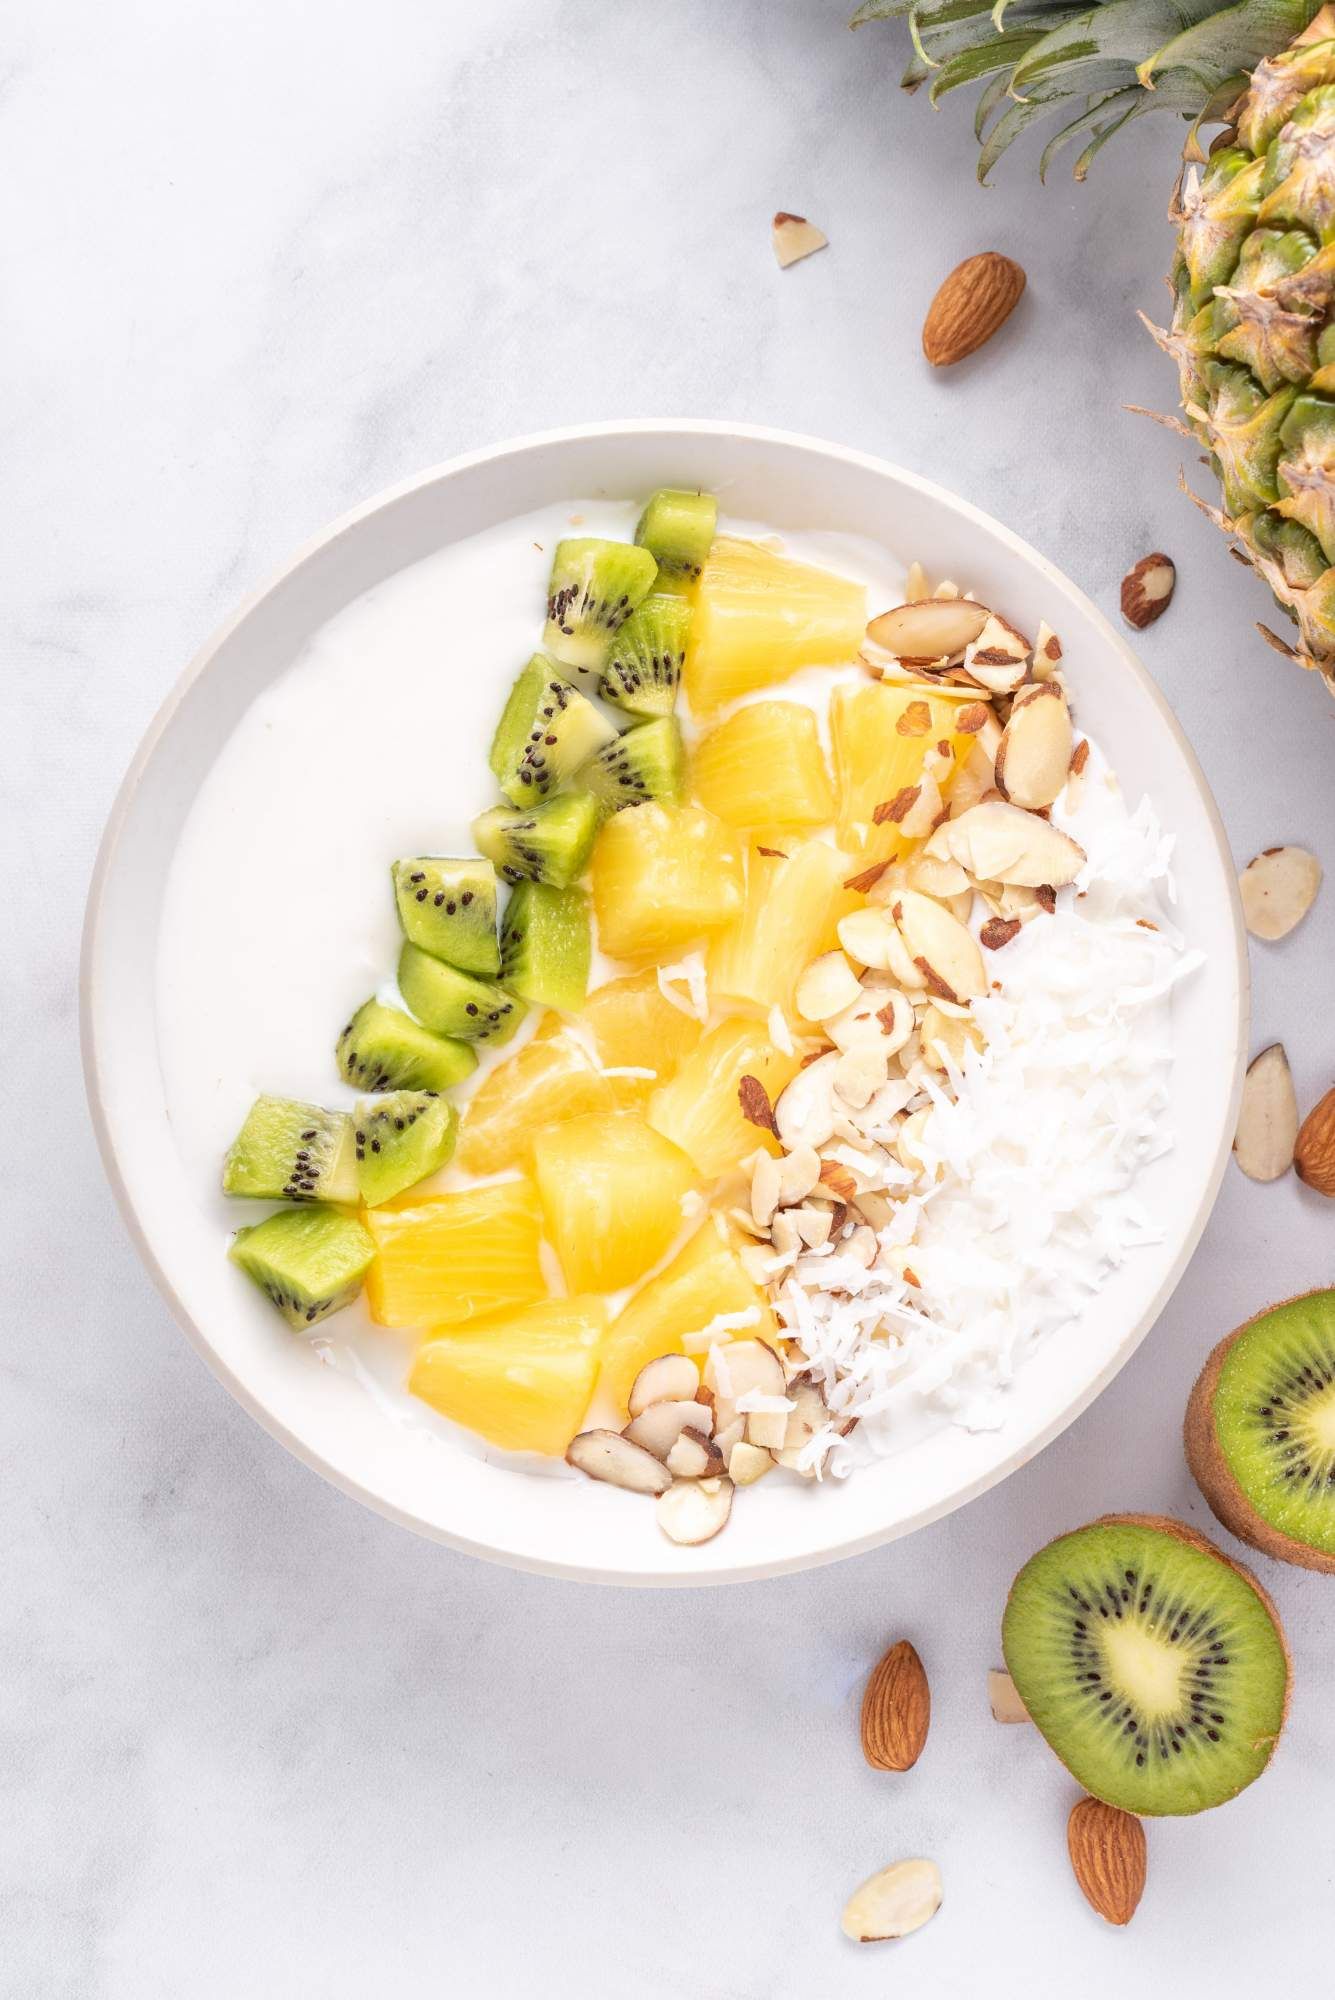 Yogurt bowl with pineapple, kiwi, shredded coconut, and sliced almond in a white bowl with kiwi on the side.